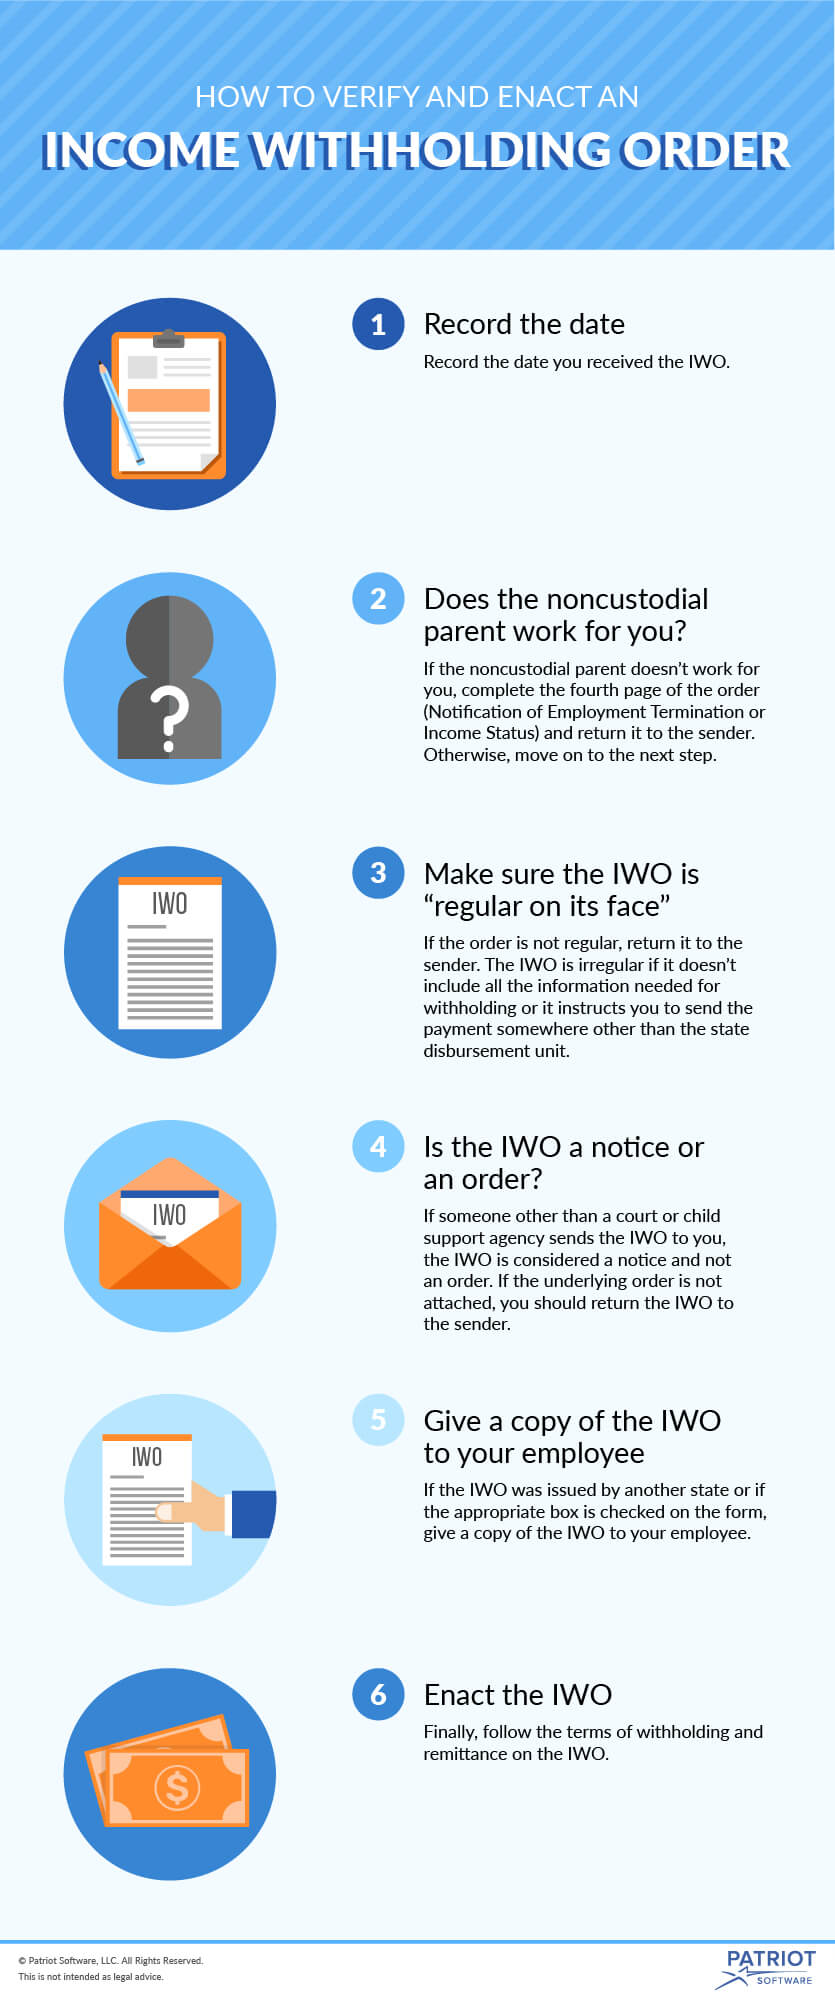 How to Verify and Enact and Income Withholding Order infographic